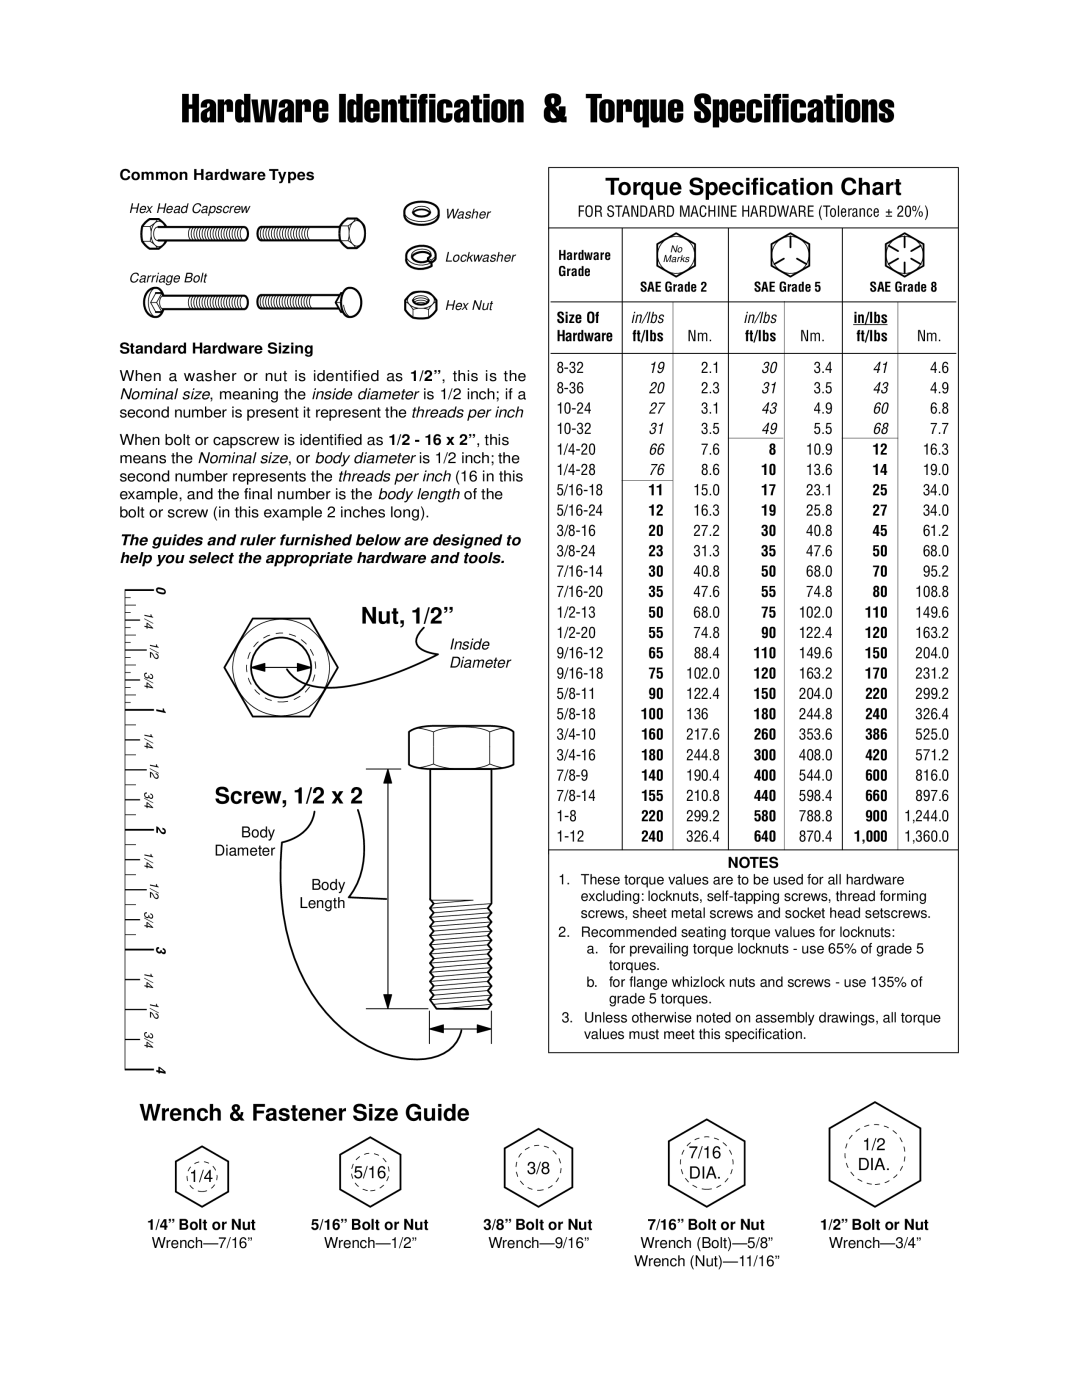 Snapper 4808 manual Wrench & Fastener Size Guide, 7/16, 5/16, Hardware Identification & Torque Specifications, Nut, 1/2” 